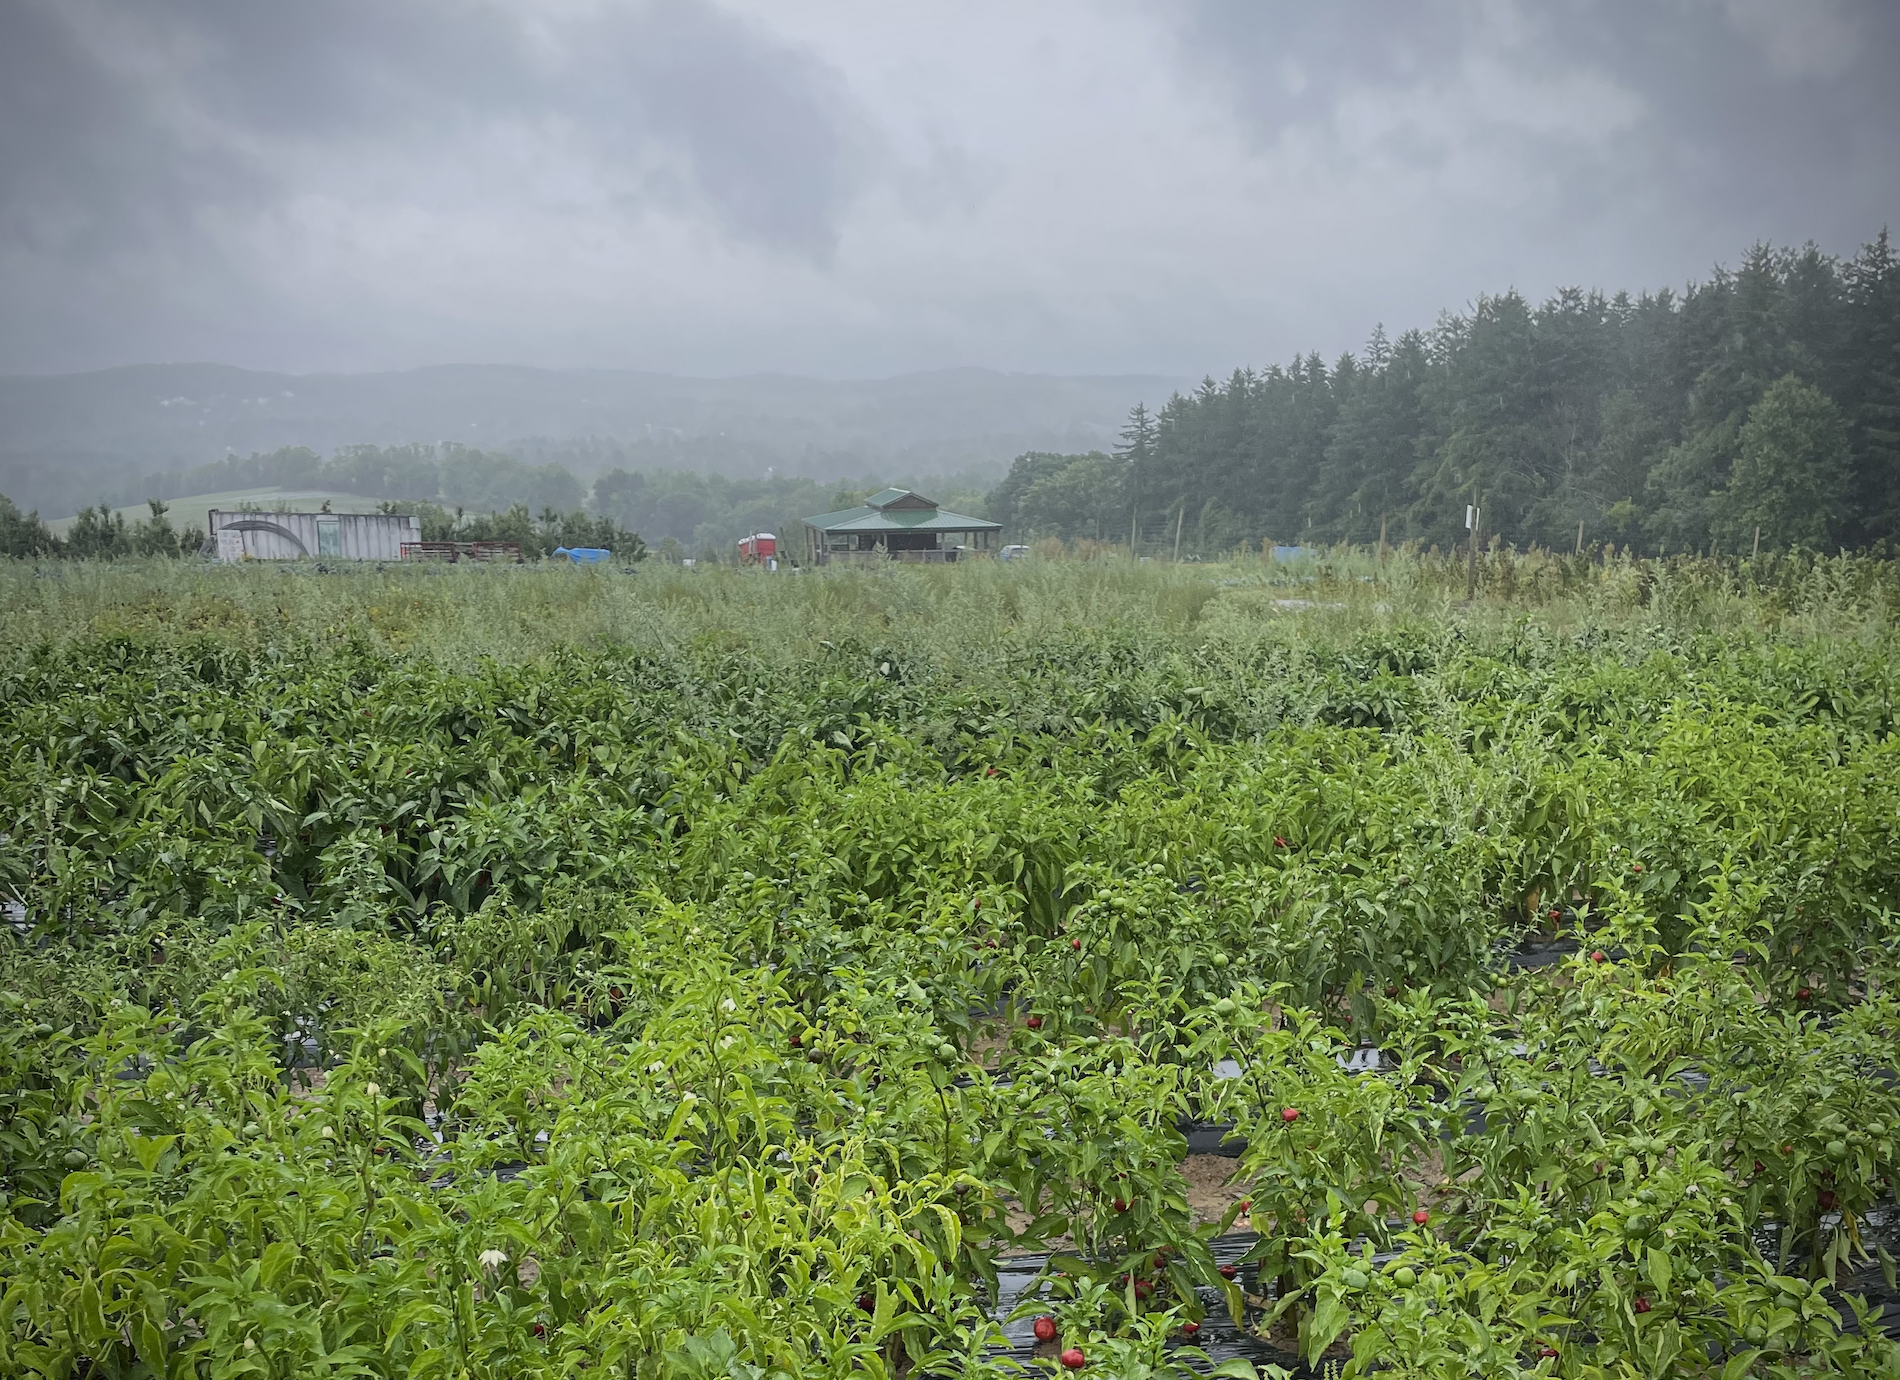 An upstate New York Farm is shown under overcast skies.